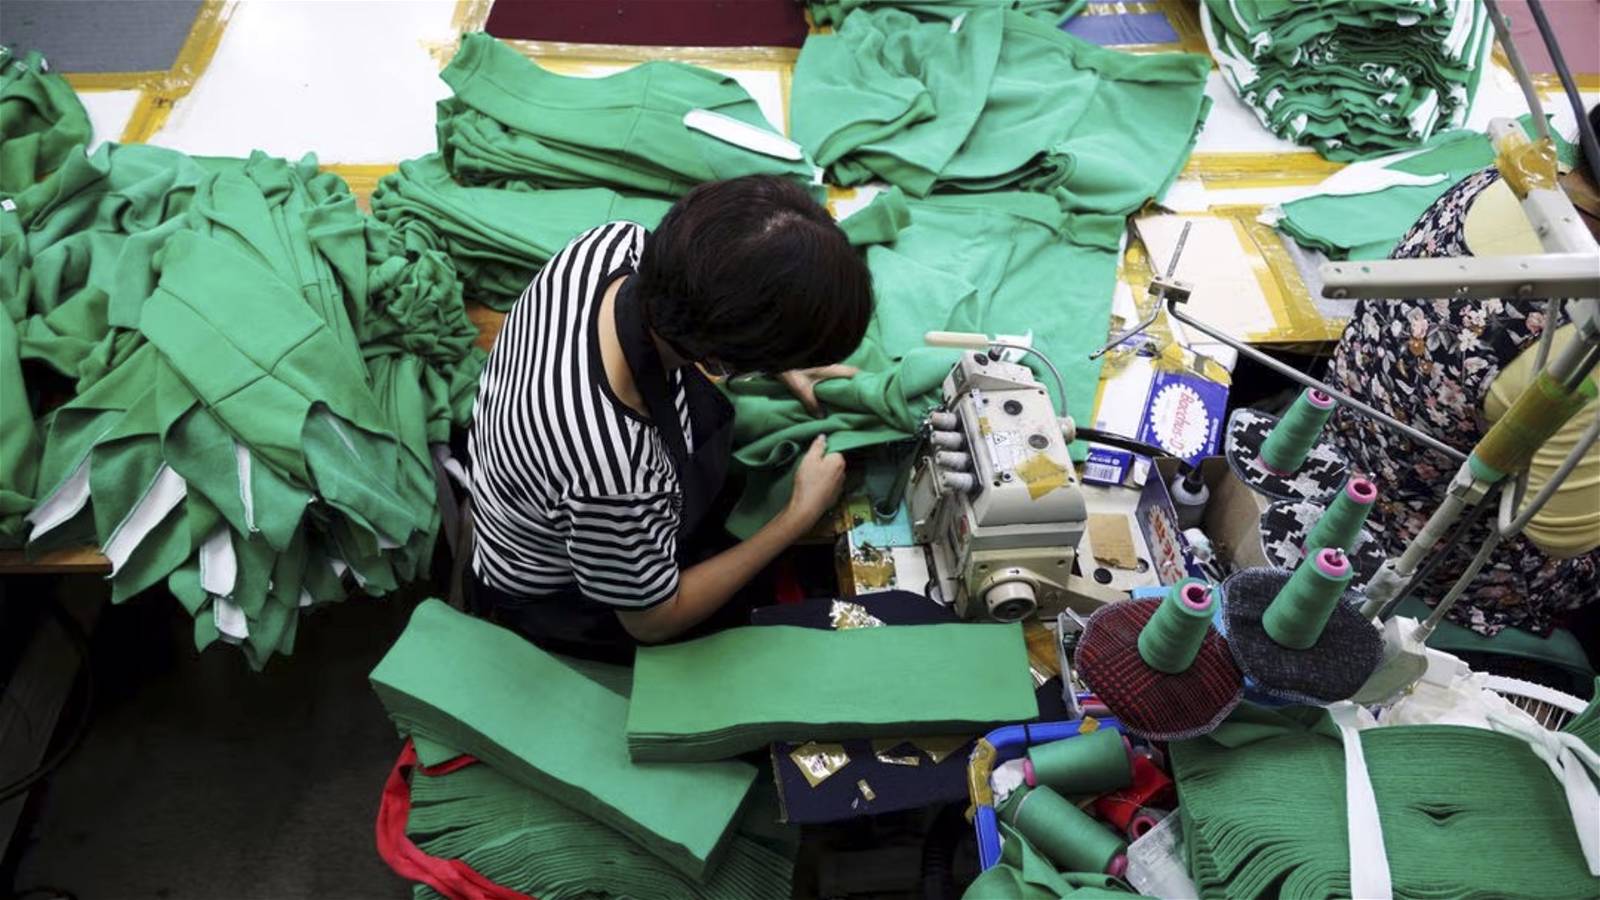 In trying to slow down fast fashion, regulators should focus on overproduction 